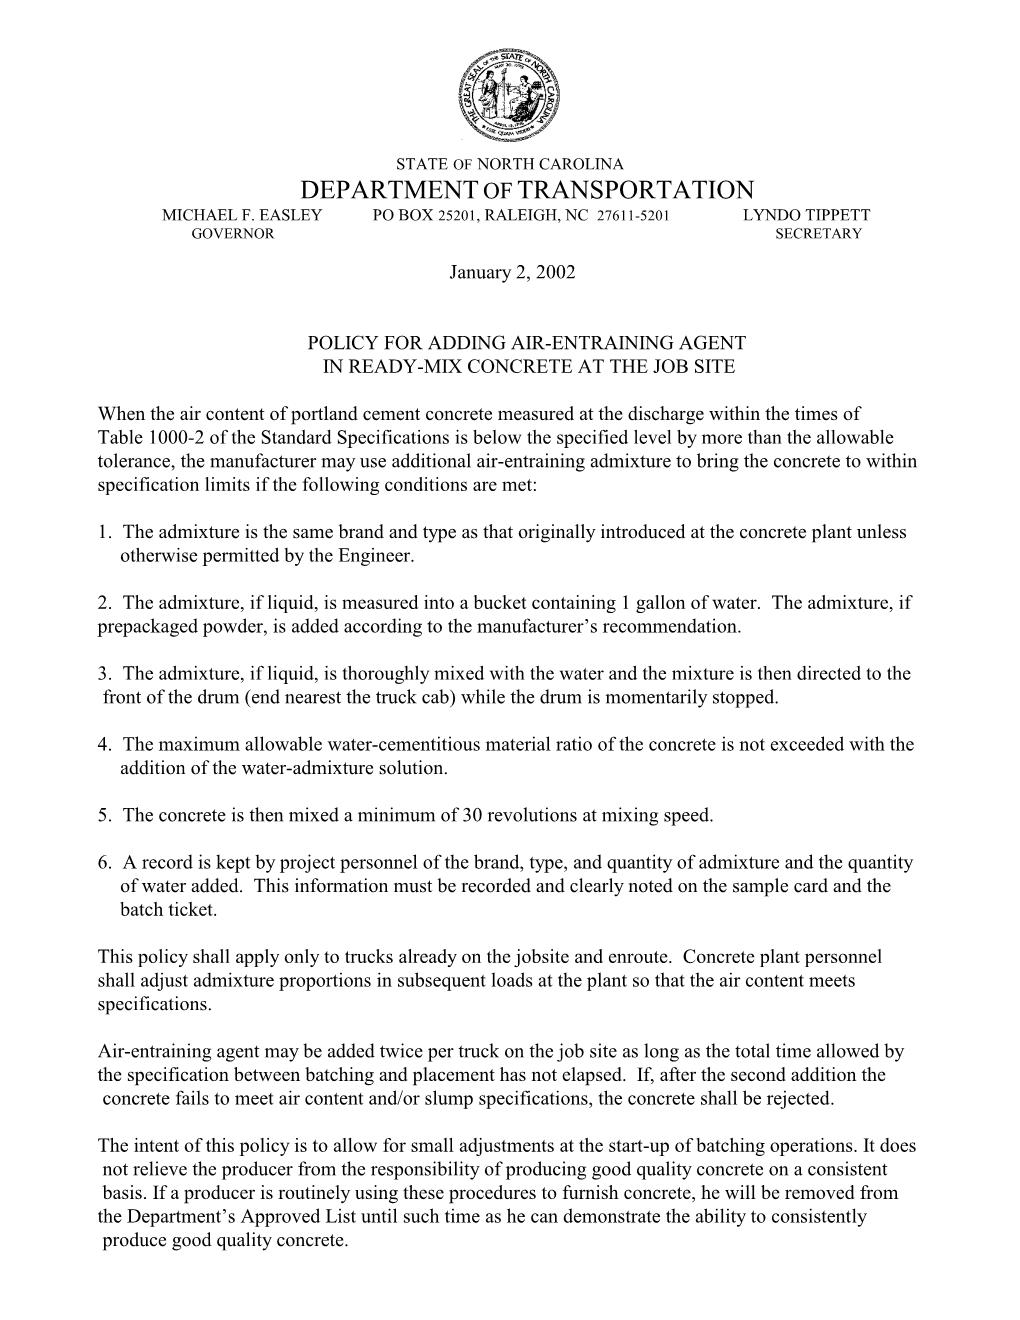 MT Policy for Adding Air-Entraining Agents 01022002.jpg